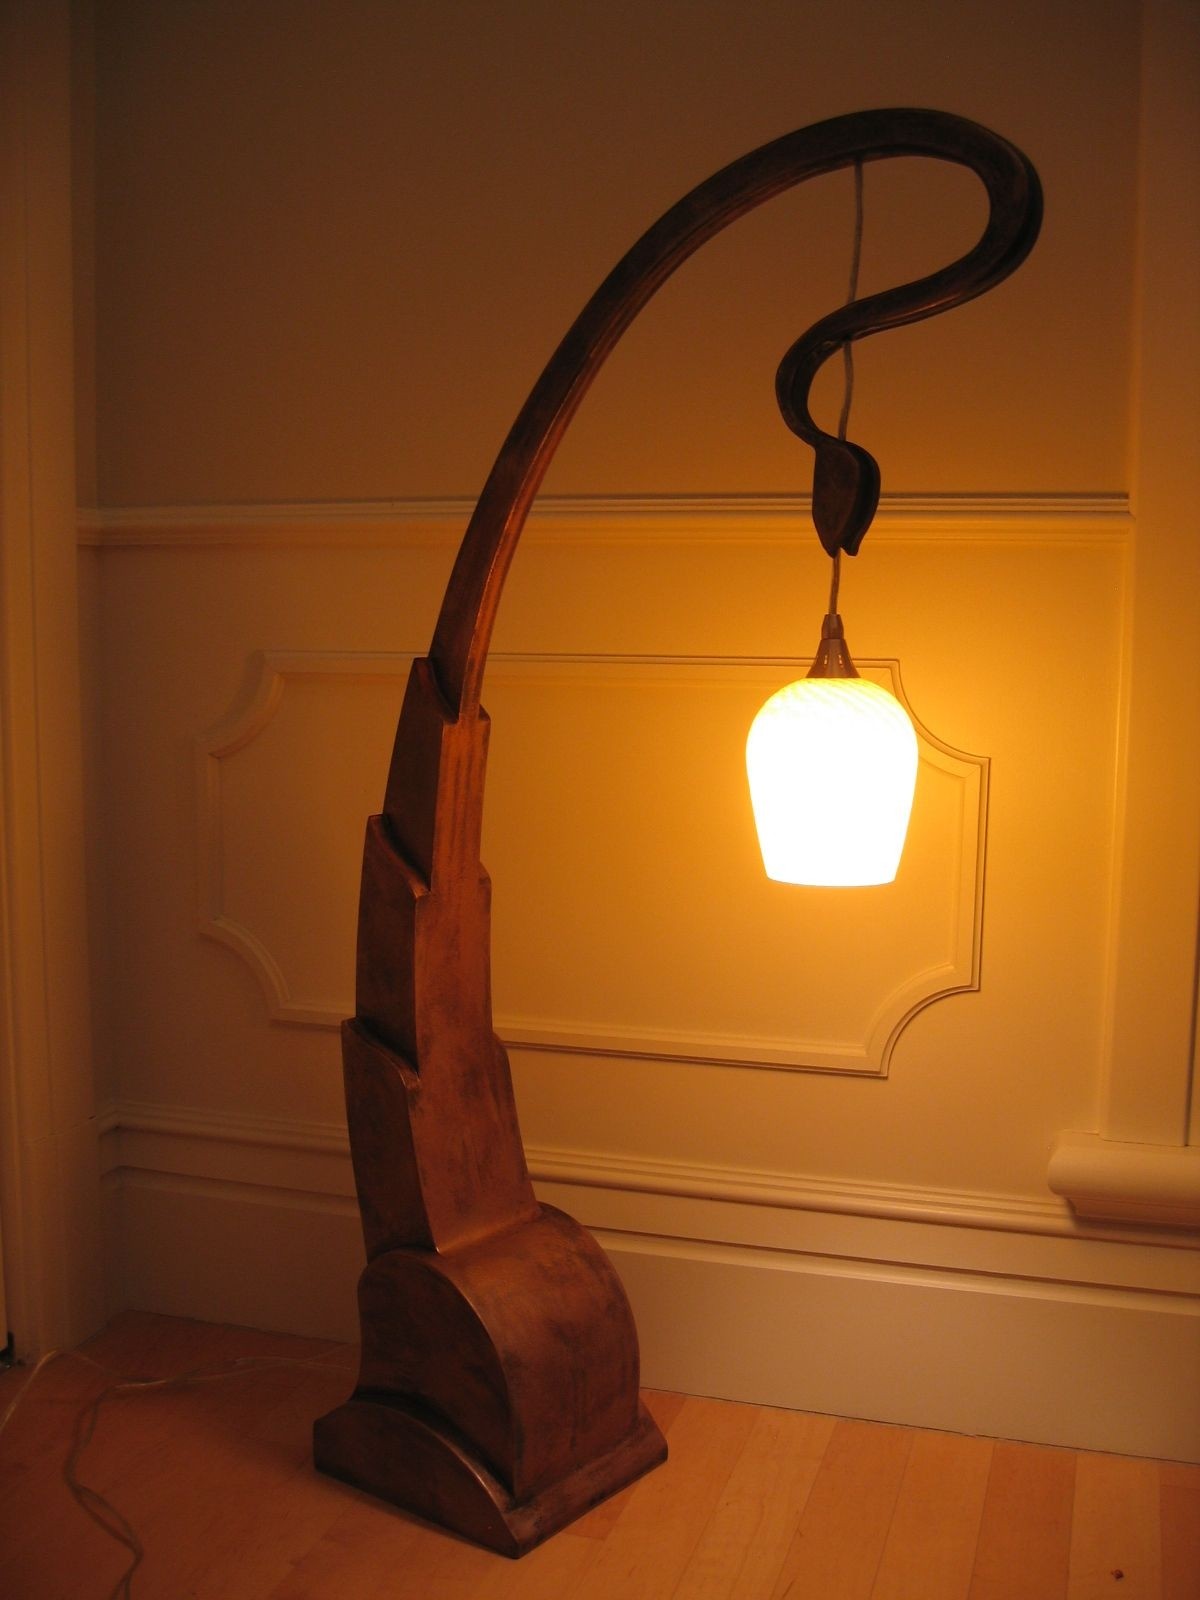 Furniture art nouveau lamp this lamp was custom designed by